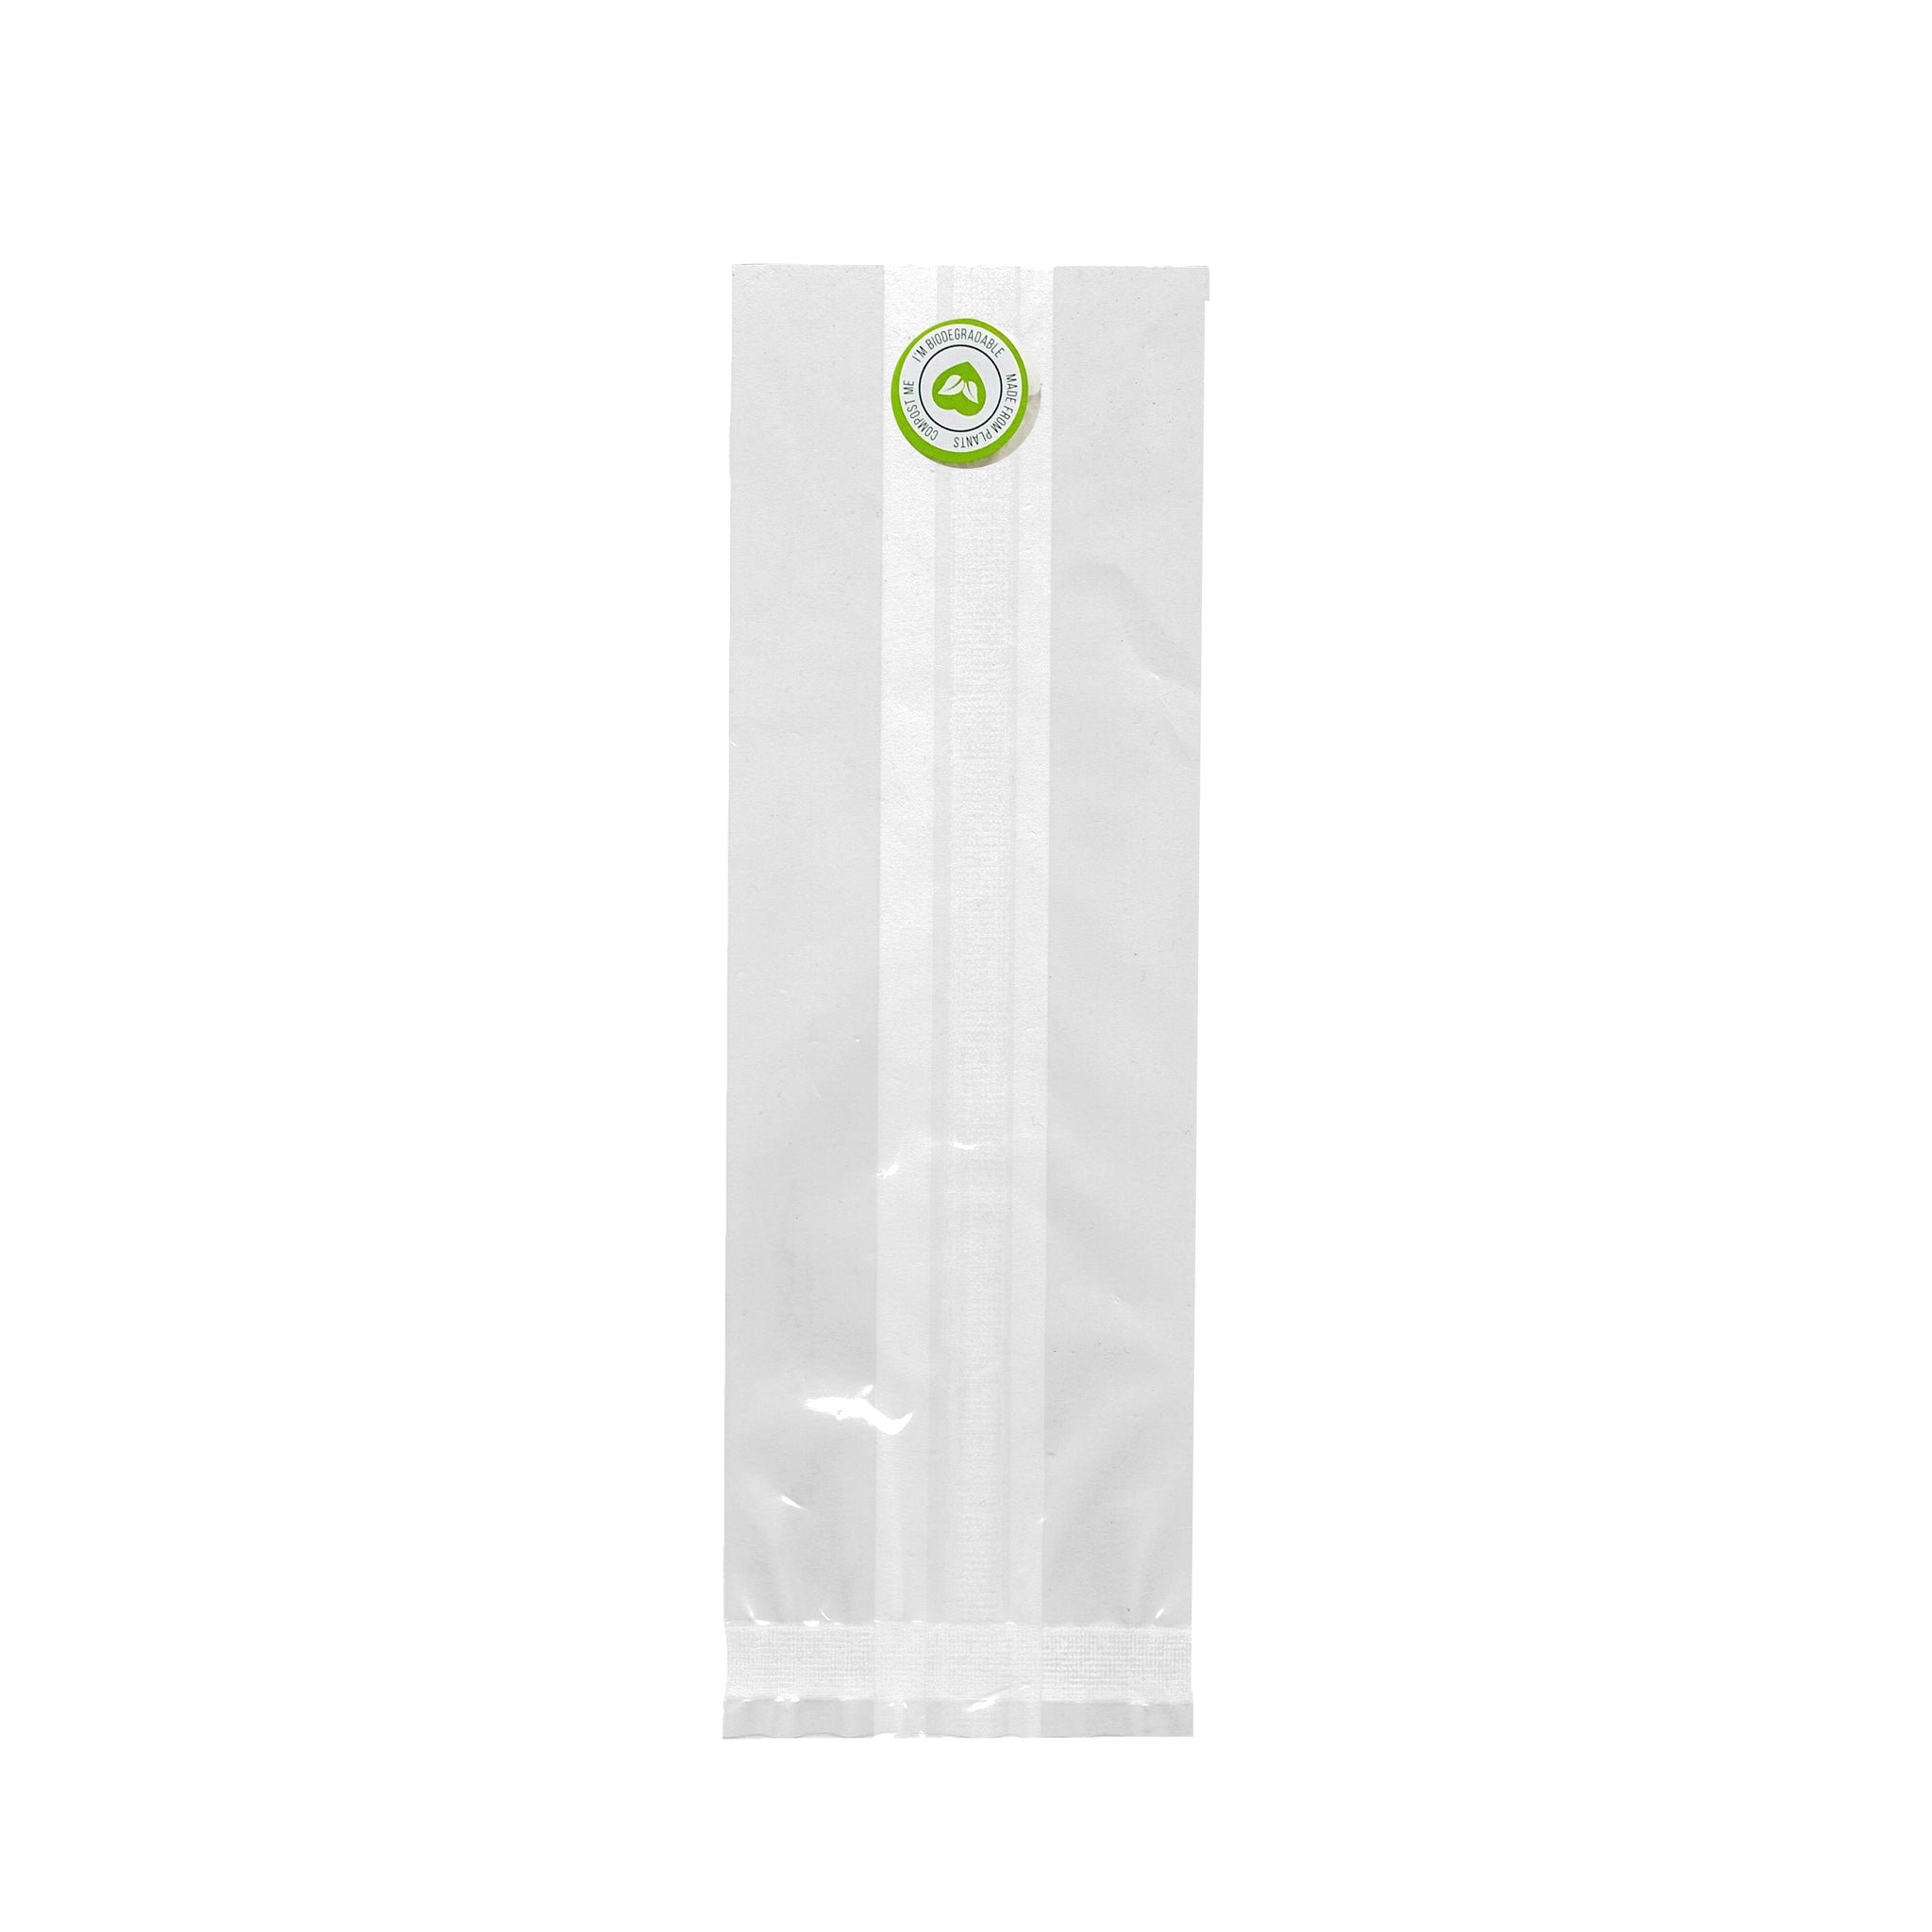 Amazon.com: Green Cello Bags,Green Plastic Bags,Green Cellophane Bags,Green  Treat Bags,Green Candy Bags,(6x9 inch,Pack of 50) : Health & Household